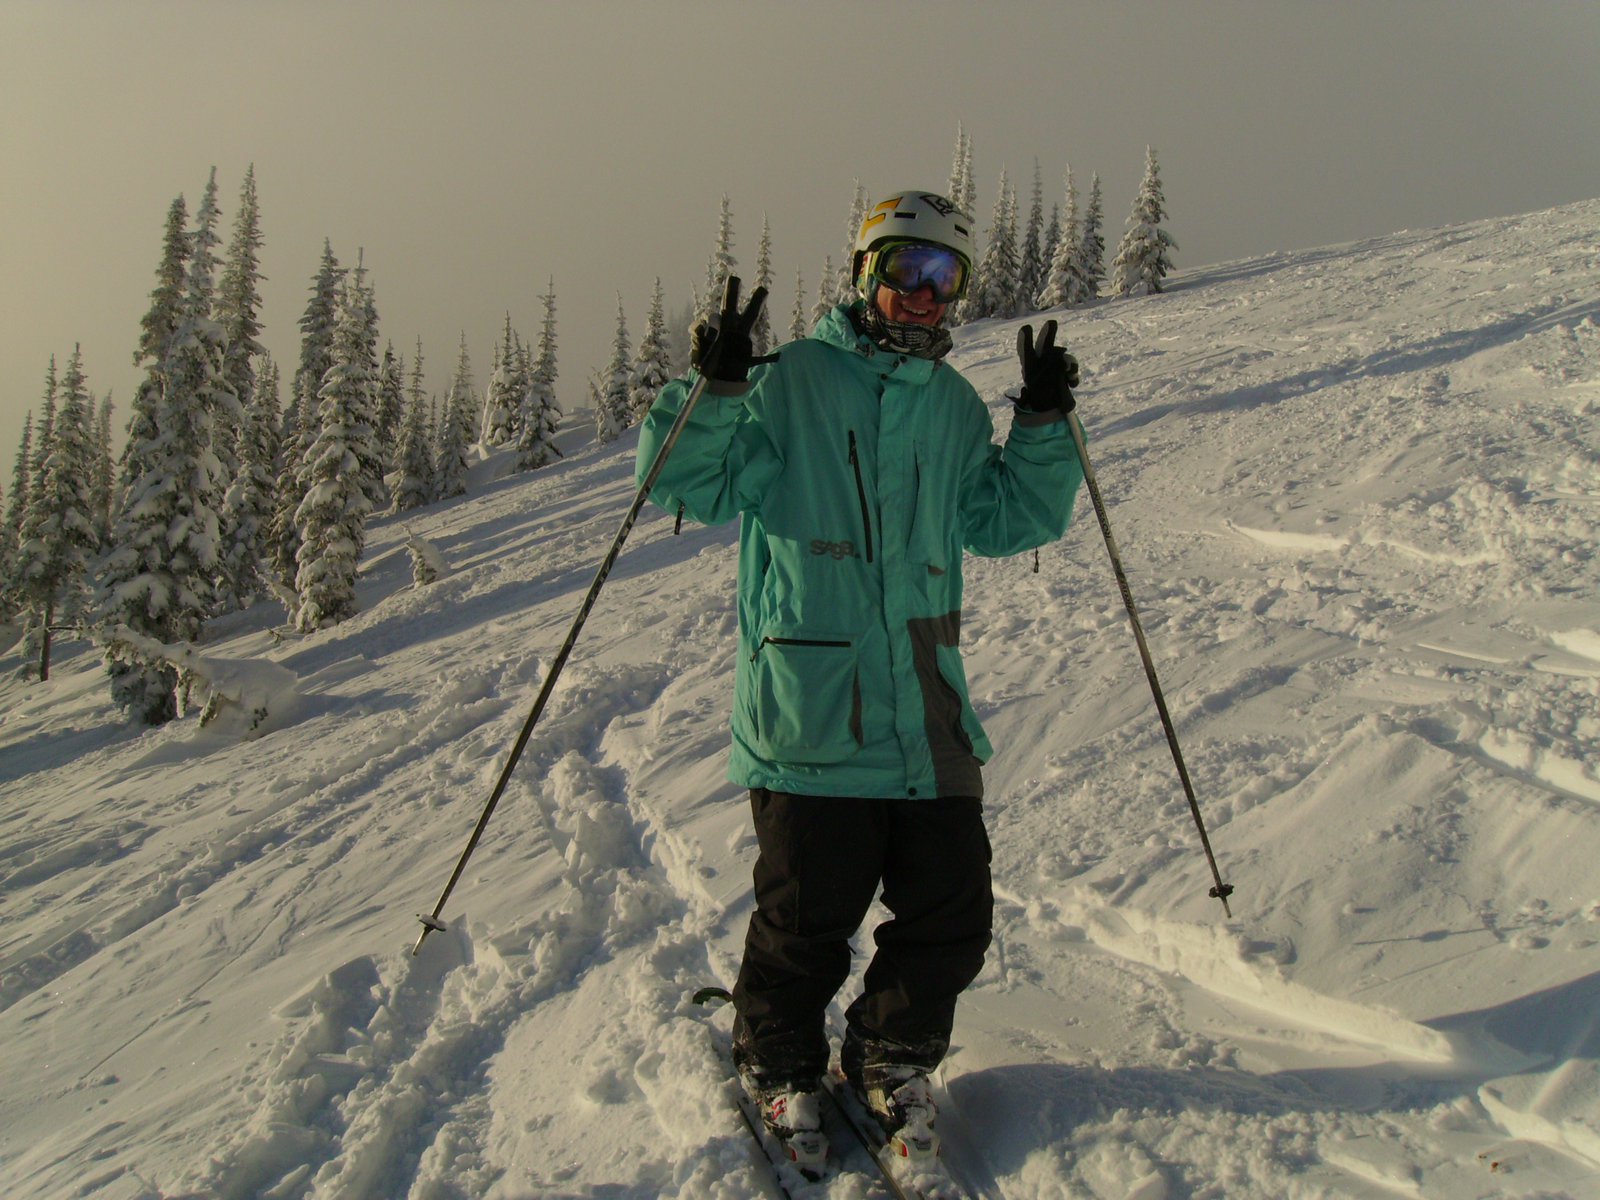 Stoked at the top of Revy